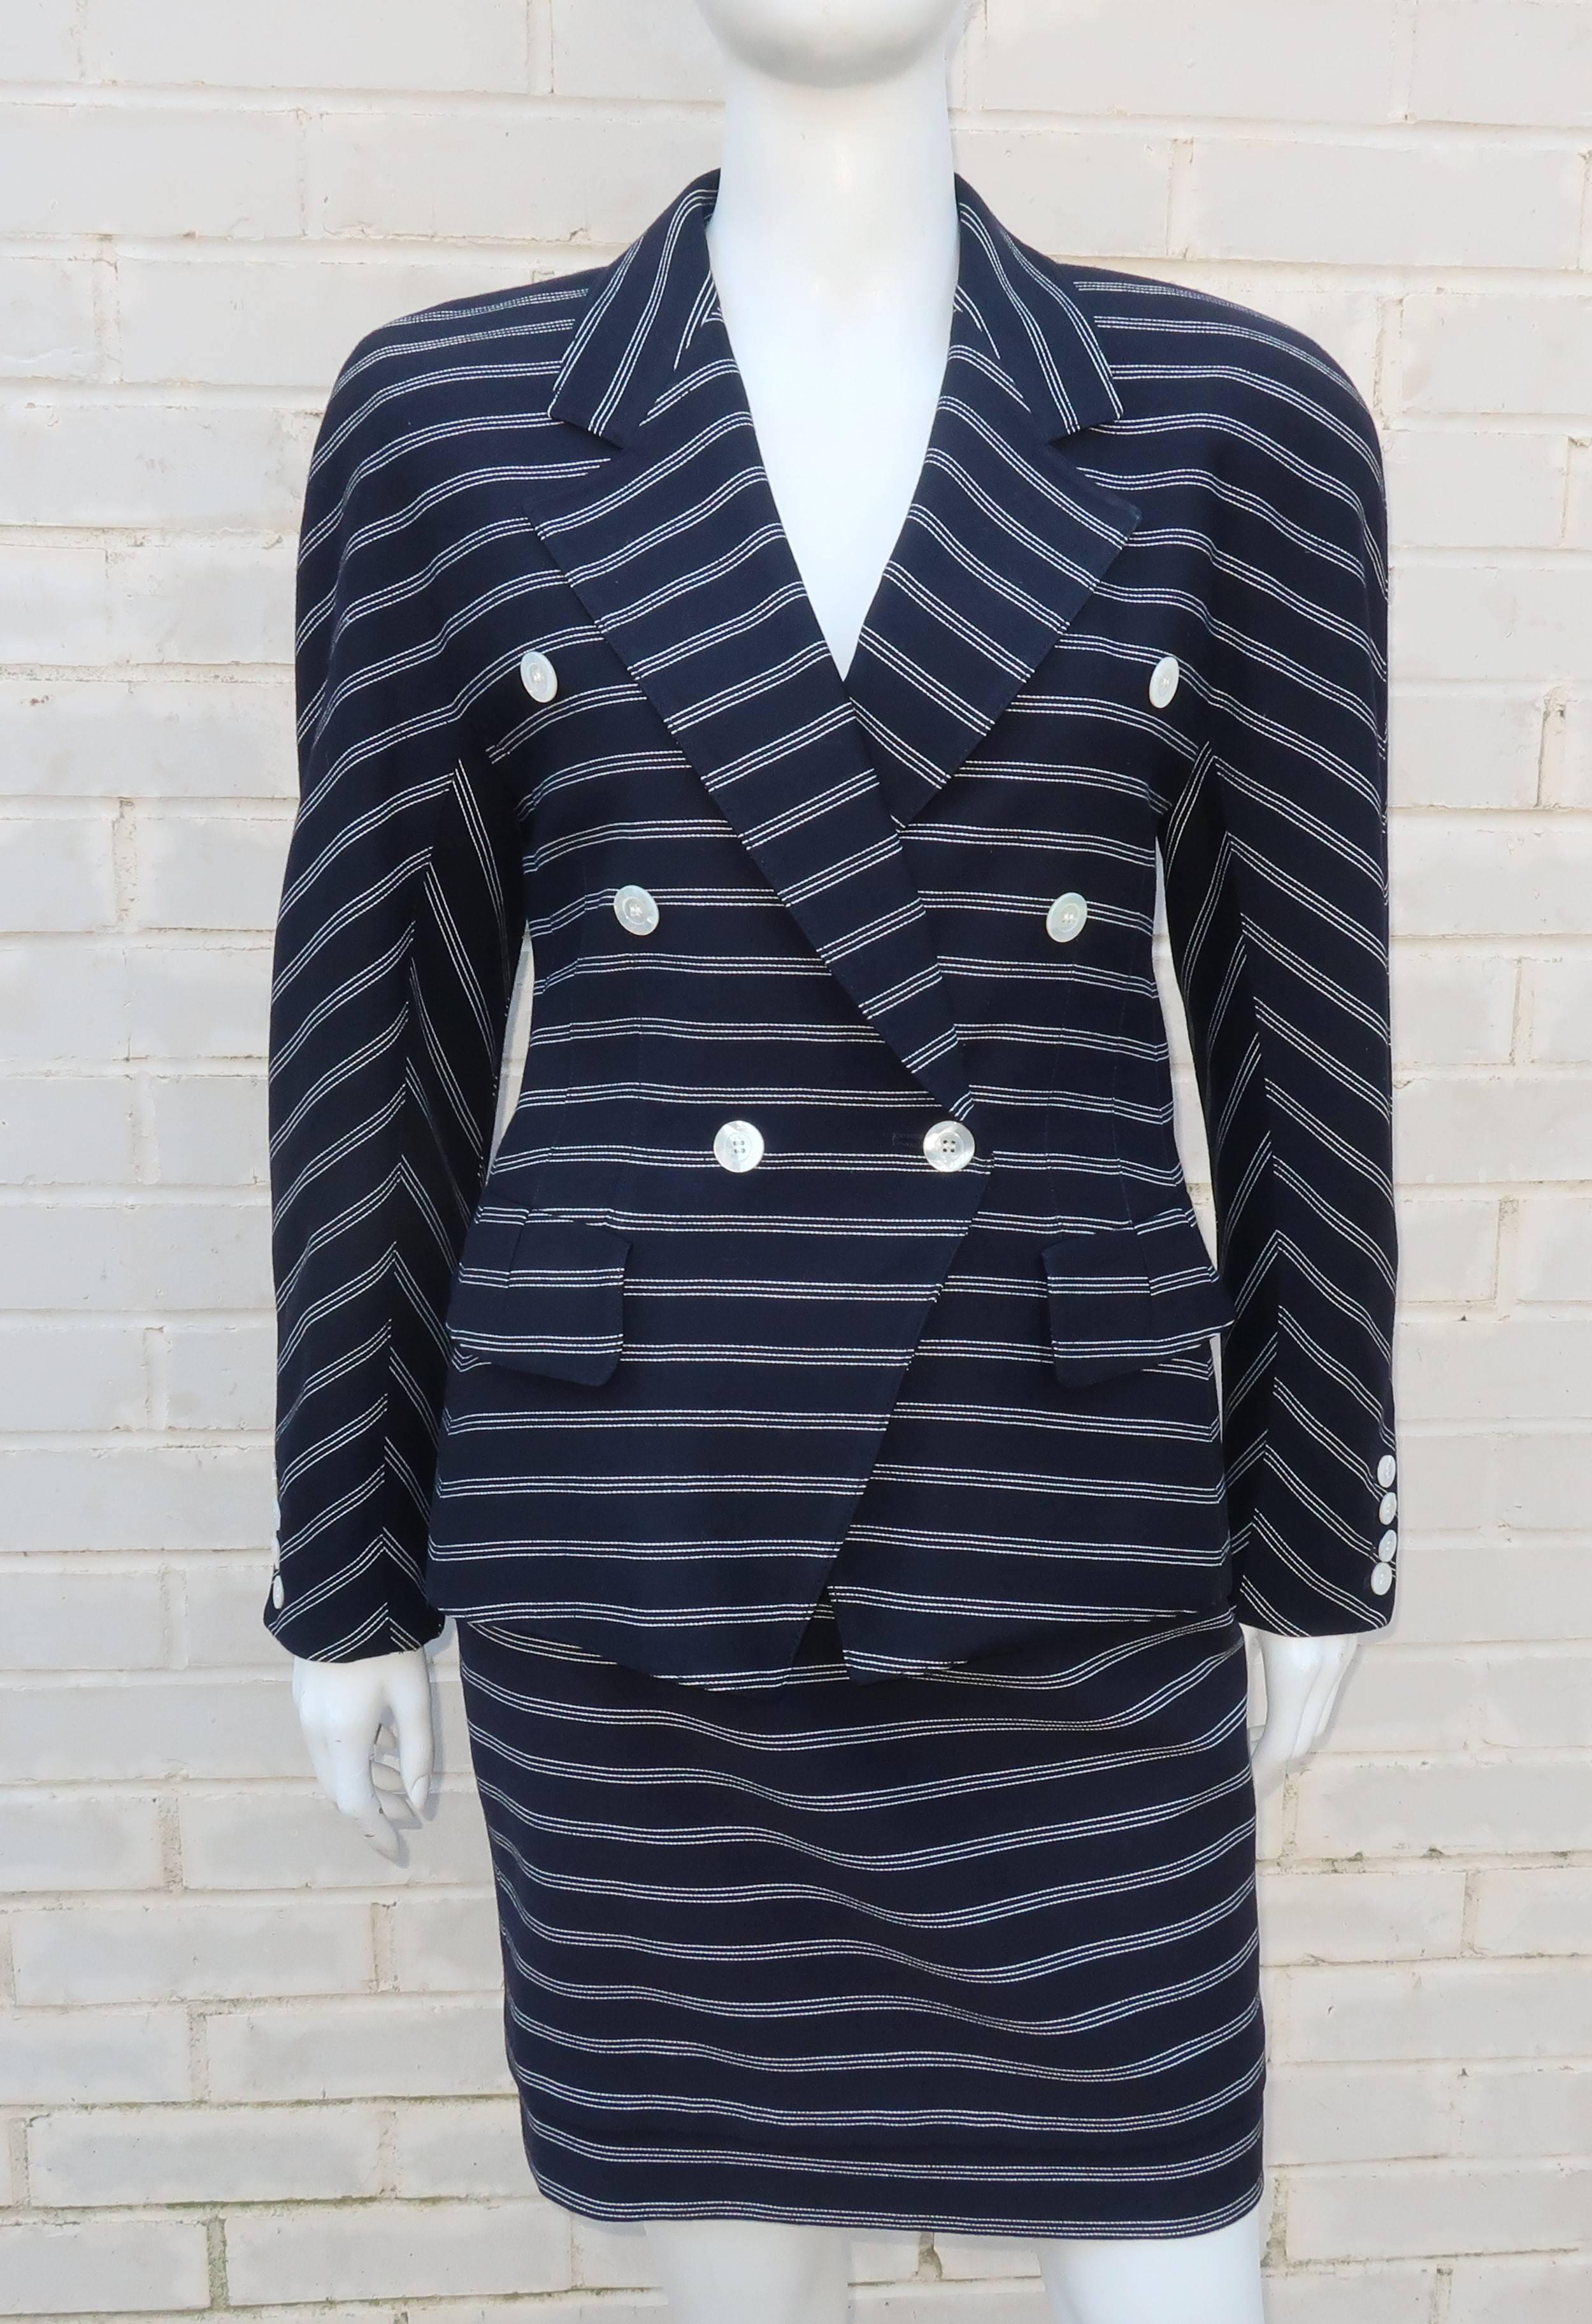 Some of the most beautiful power suits of the 1980's sprung from the artistic mind of Margaretha Ley and her Escada label.  This gorgeous lightweight wool dark blue and white striped skirt suit is a perfect example of Escada's use of high quality